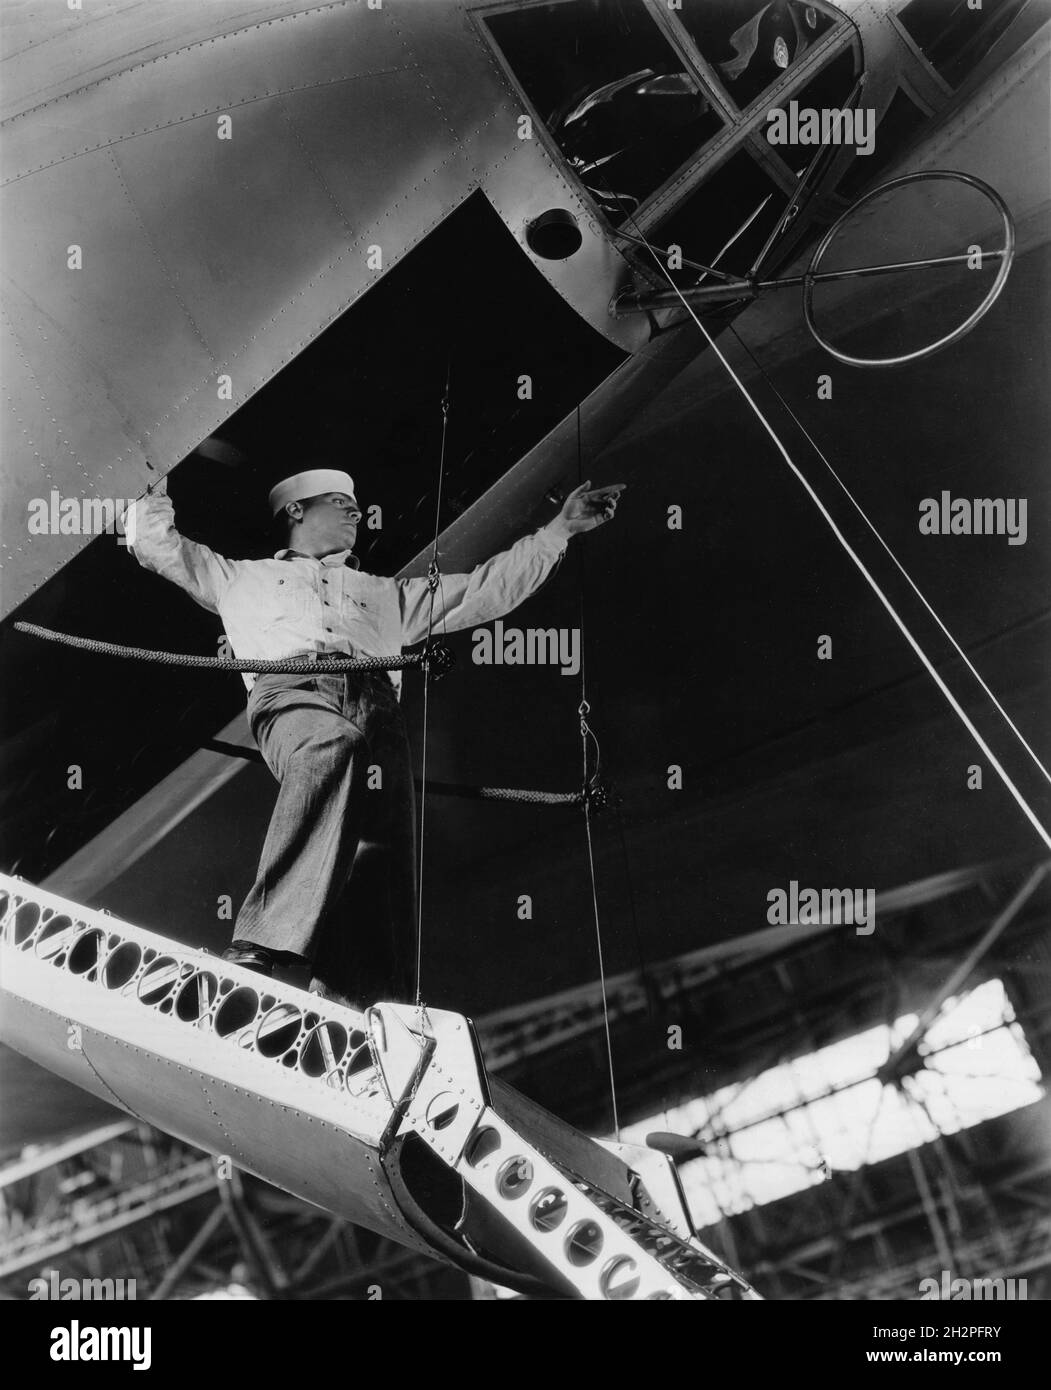 JAMES CAGNEY on set location candid inspecting aircraft during filming of DEVIL DOGS OF THE AIR 1935 director LLOYD BACON based on story by John Monk Saunders costume design Orry-Kelly A Cosmopolitan Production / Warner Bros. Stock Photo